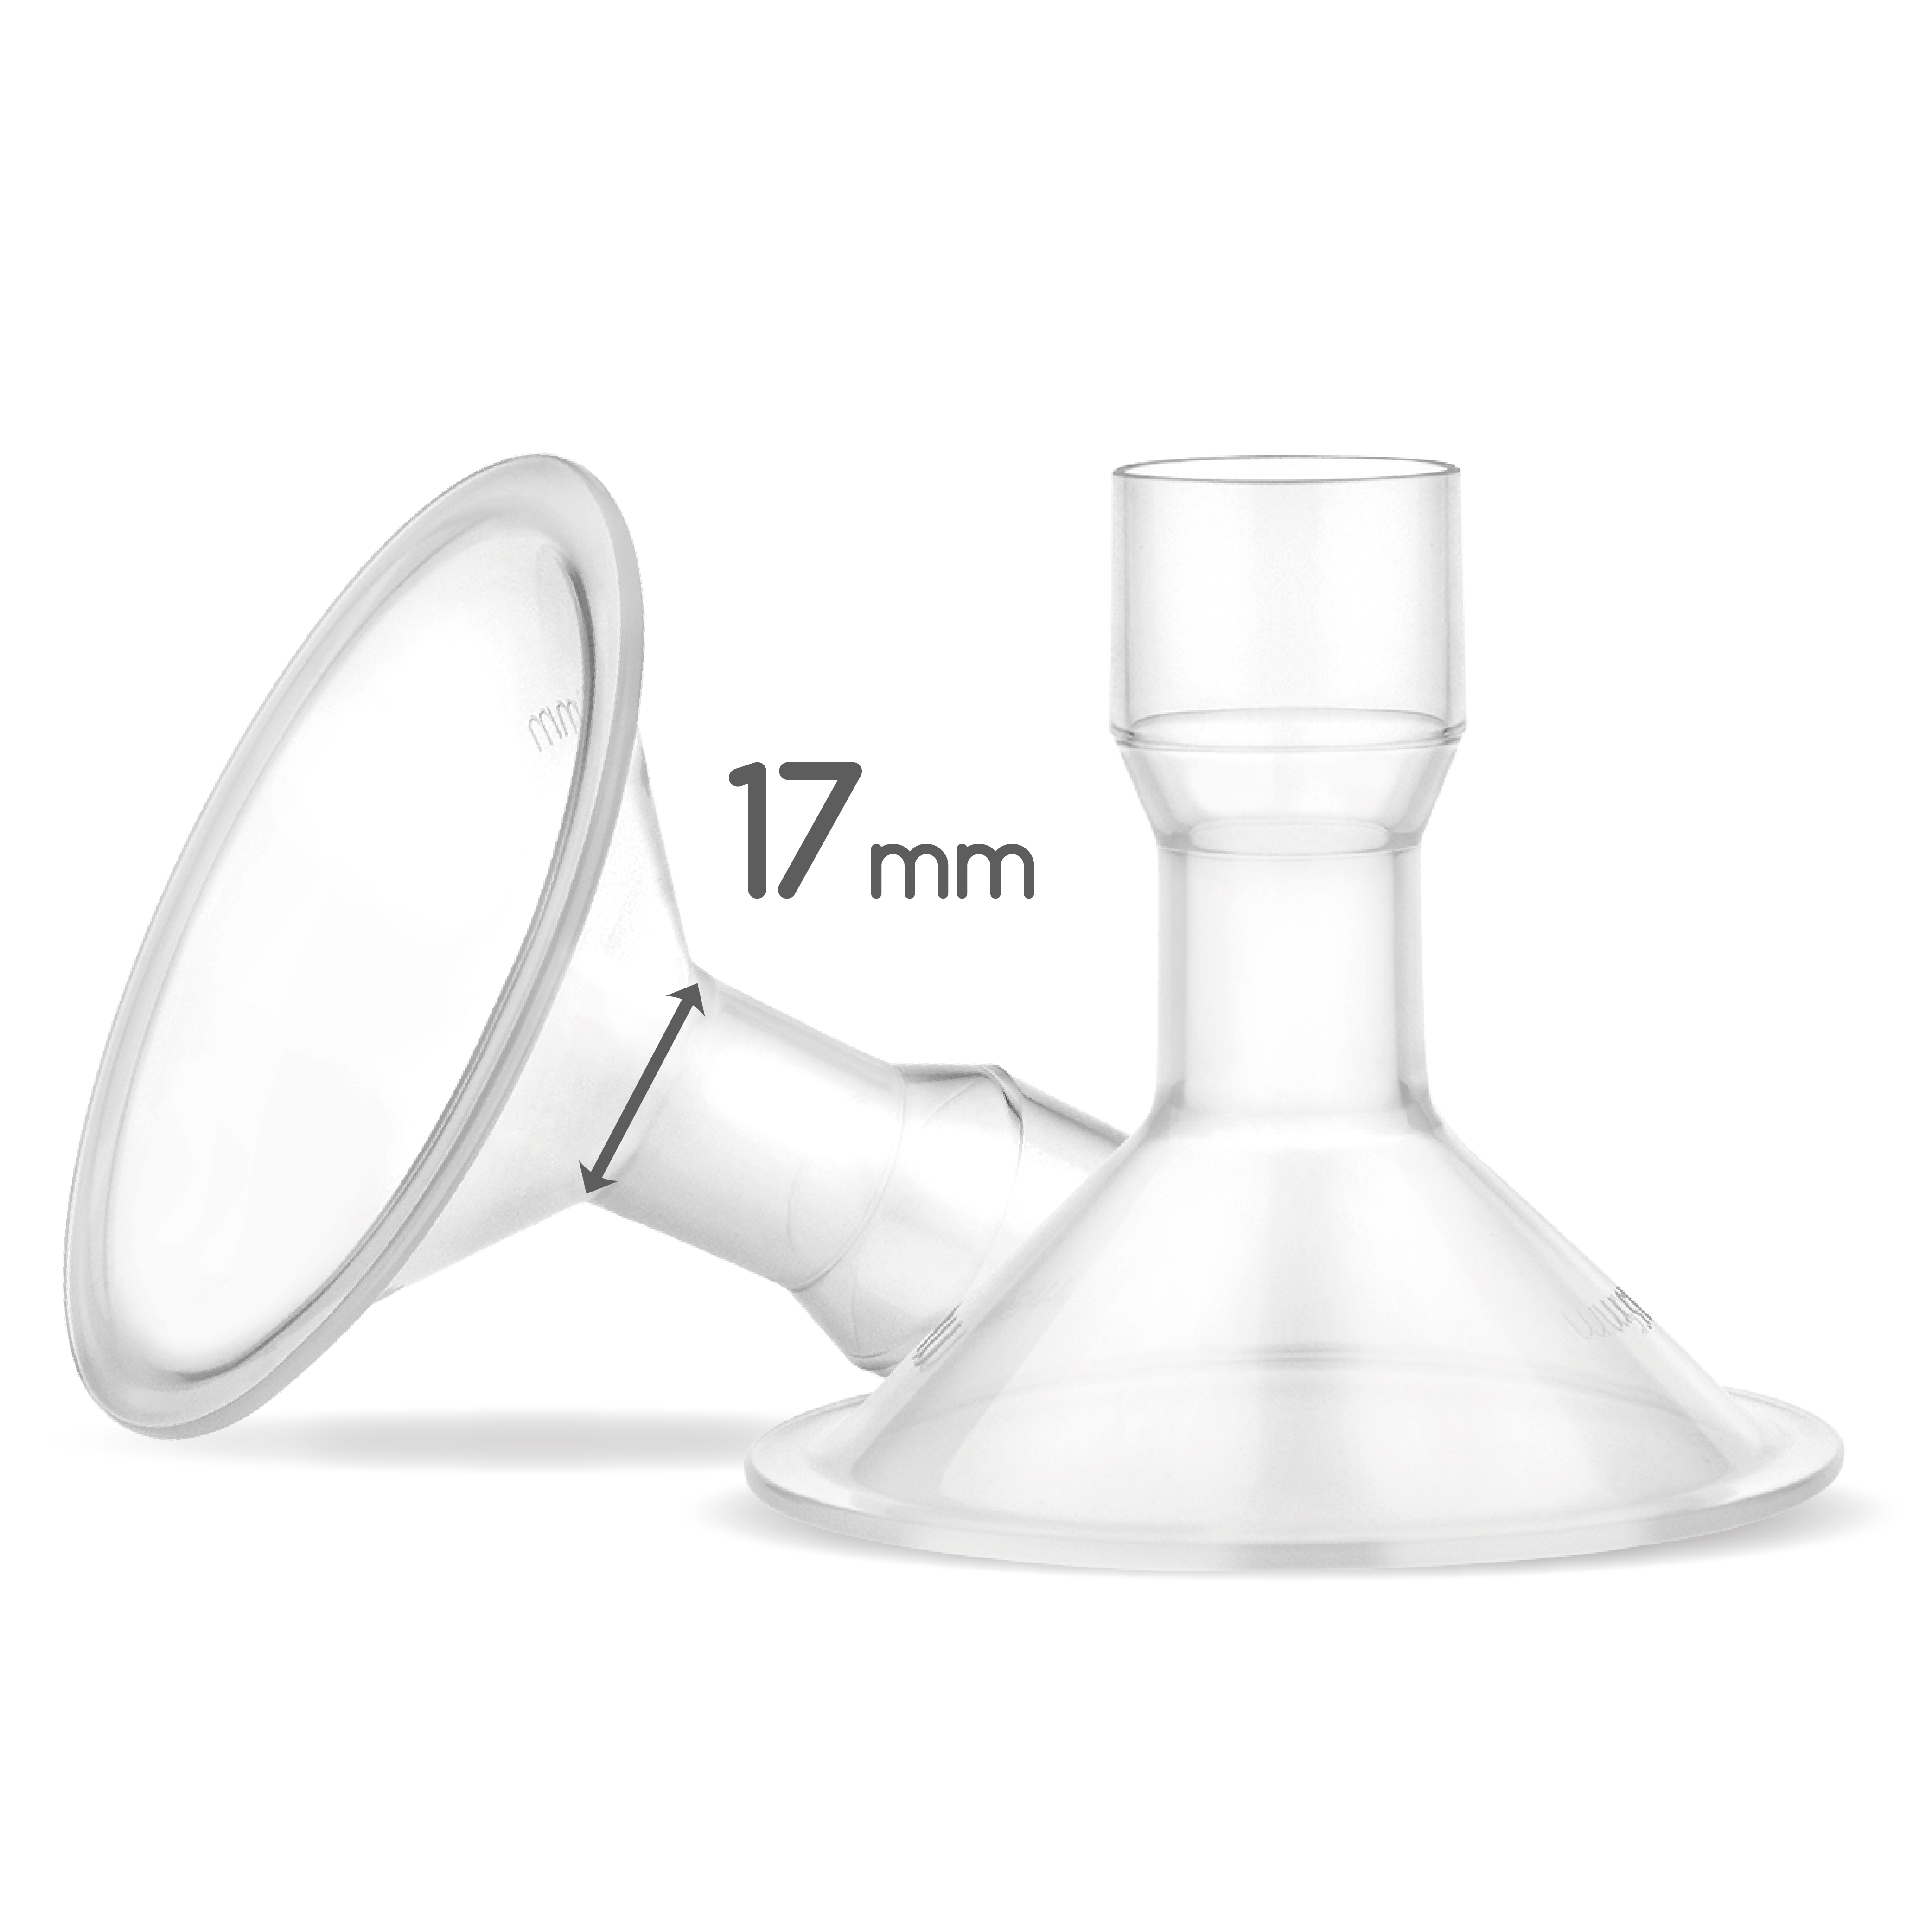 MyFit 17 mm Shield; Compatible with Medela Breast Pumps Having PersonalFit, Freestyle, Harmony, Maxi Connector; Connects; 2pc - Click Image to Close